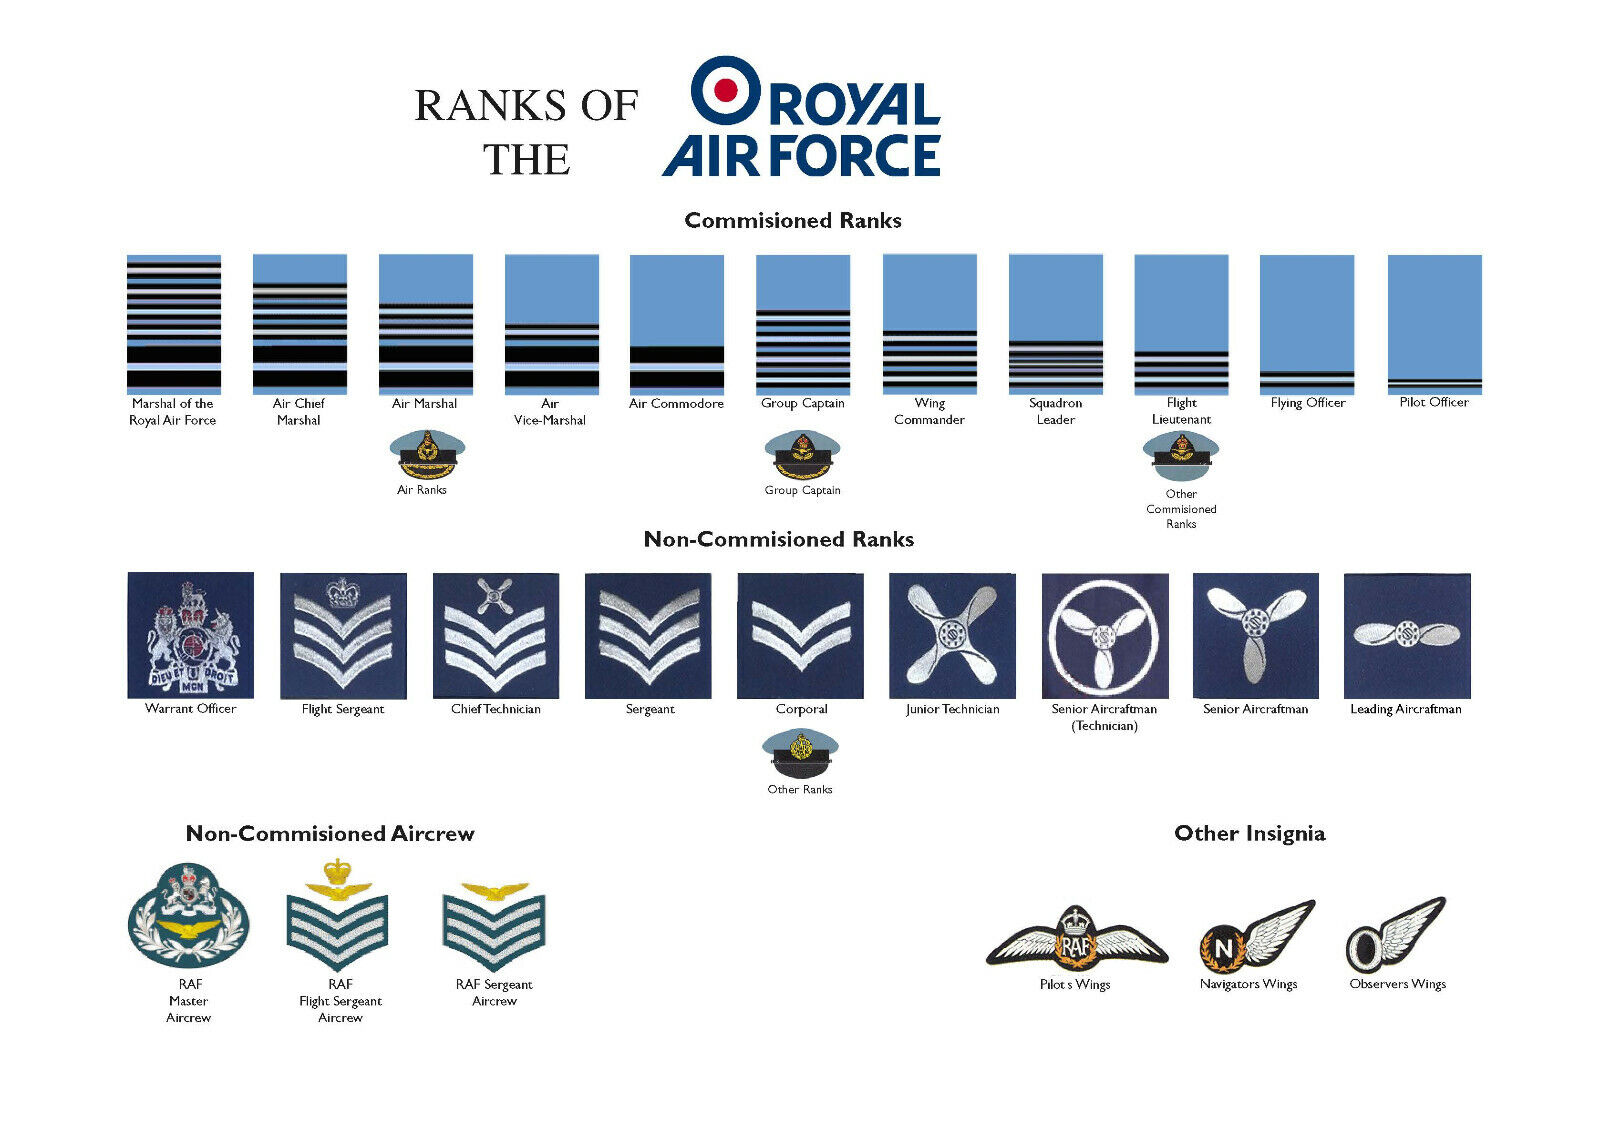 Large A3 Ranks of the Royal Air Force RAF Poster ( rank structure  New British